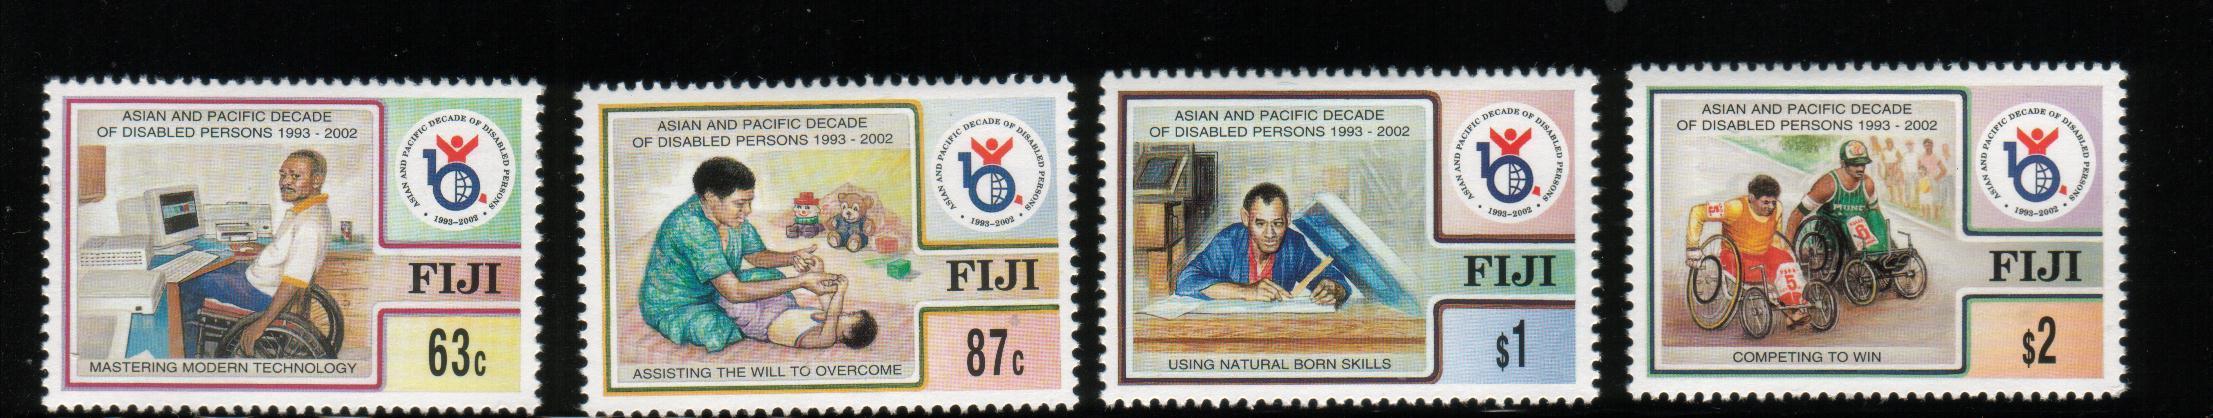 FIJI 1998 ASIA & PACIFIC DECADE OF DISABLED PERSONS SET OF 4 NHM - Fiji (1970-...)